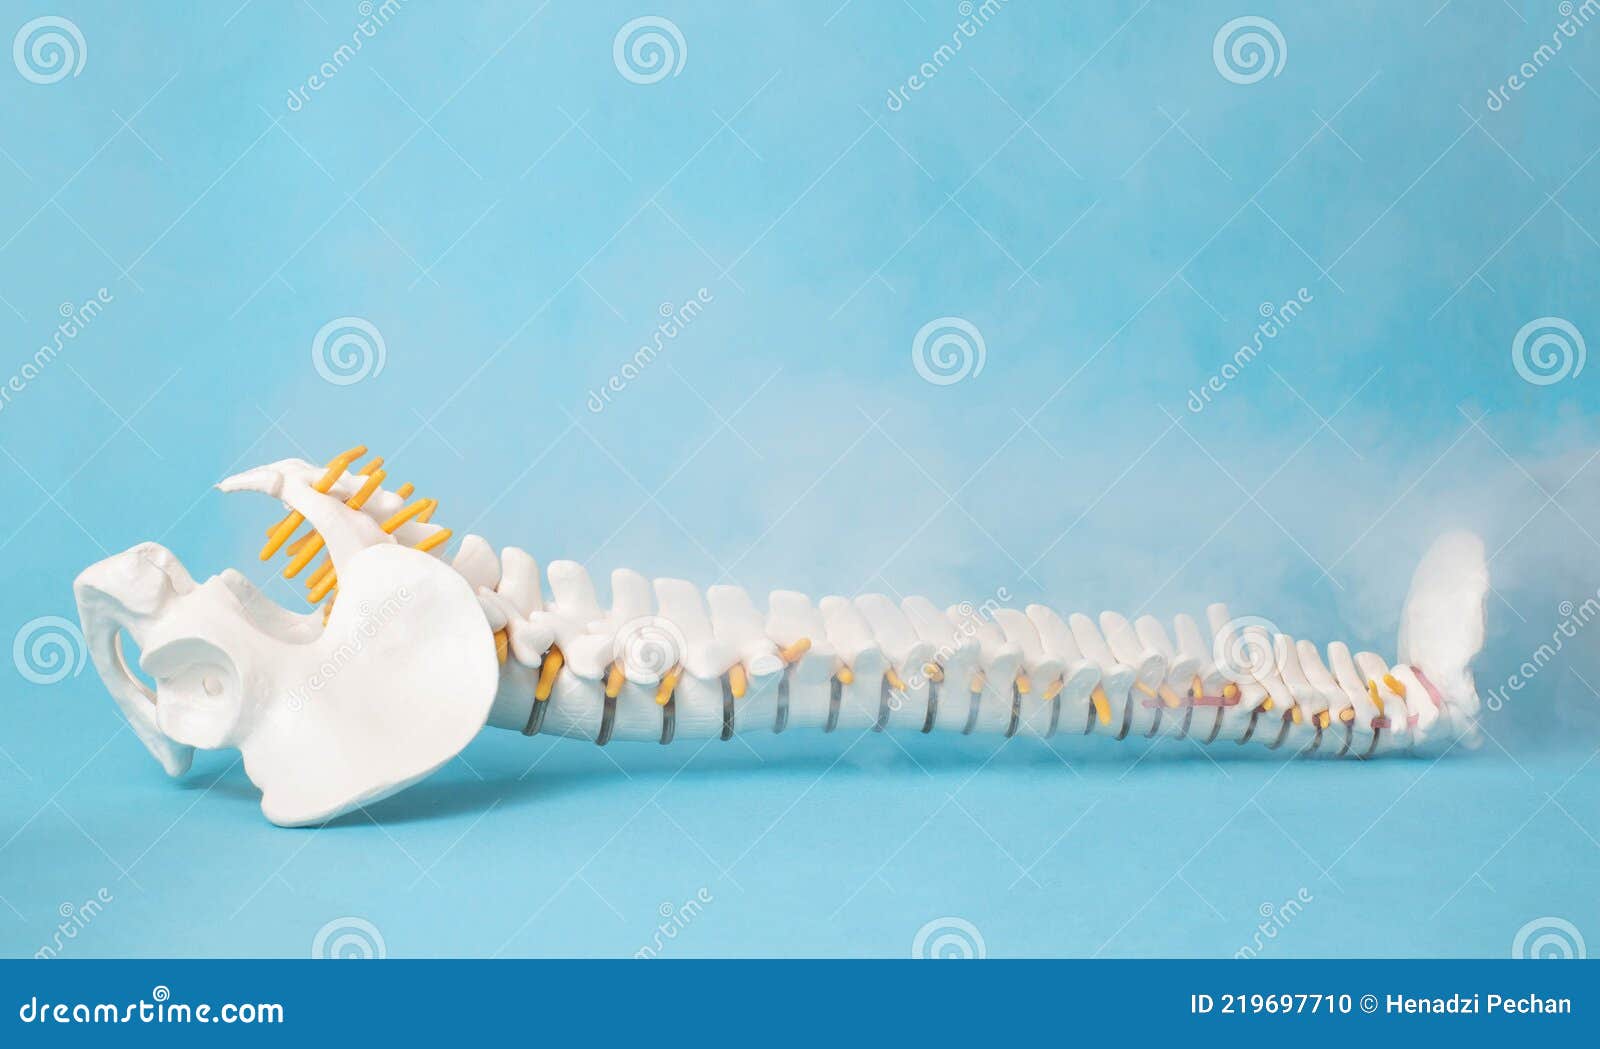 mock up of a human spine on a blue background and steam from low temperatures. cold spine treatment concept, ozone